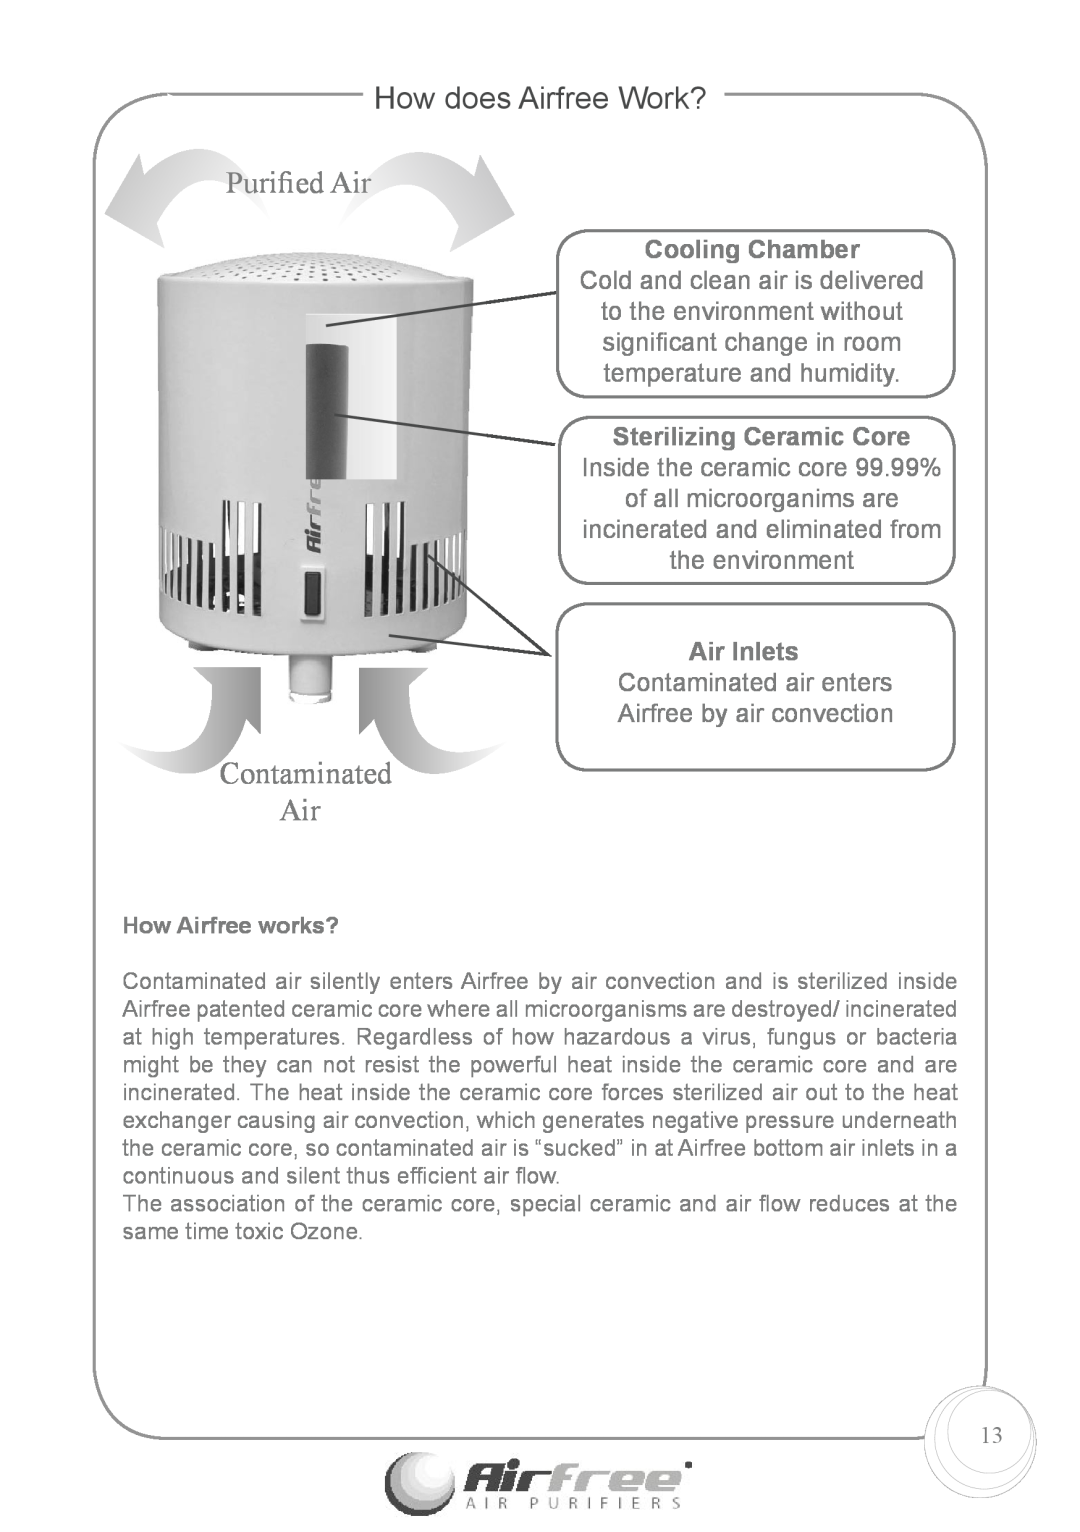 Airfree Enviro 60 How does Airfree Work?, How Airfree works?, Puriﬁed Air, Contaminated Air, Cooling Chamber, Air Inlets 